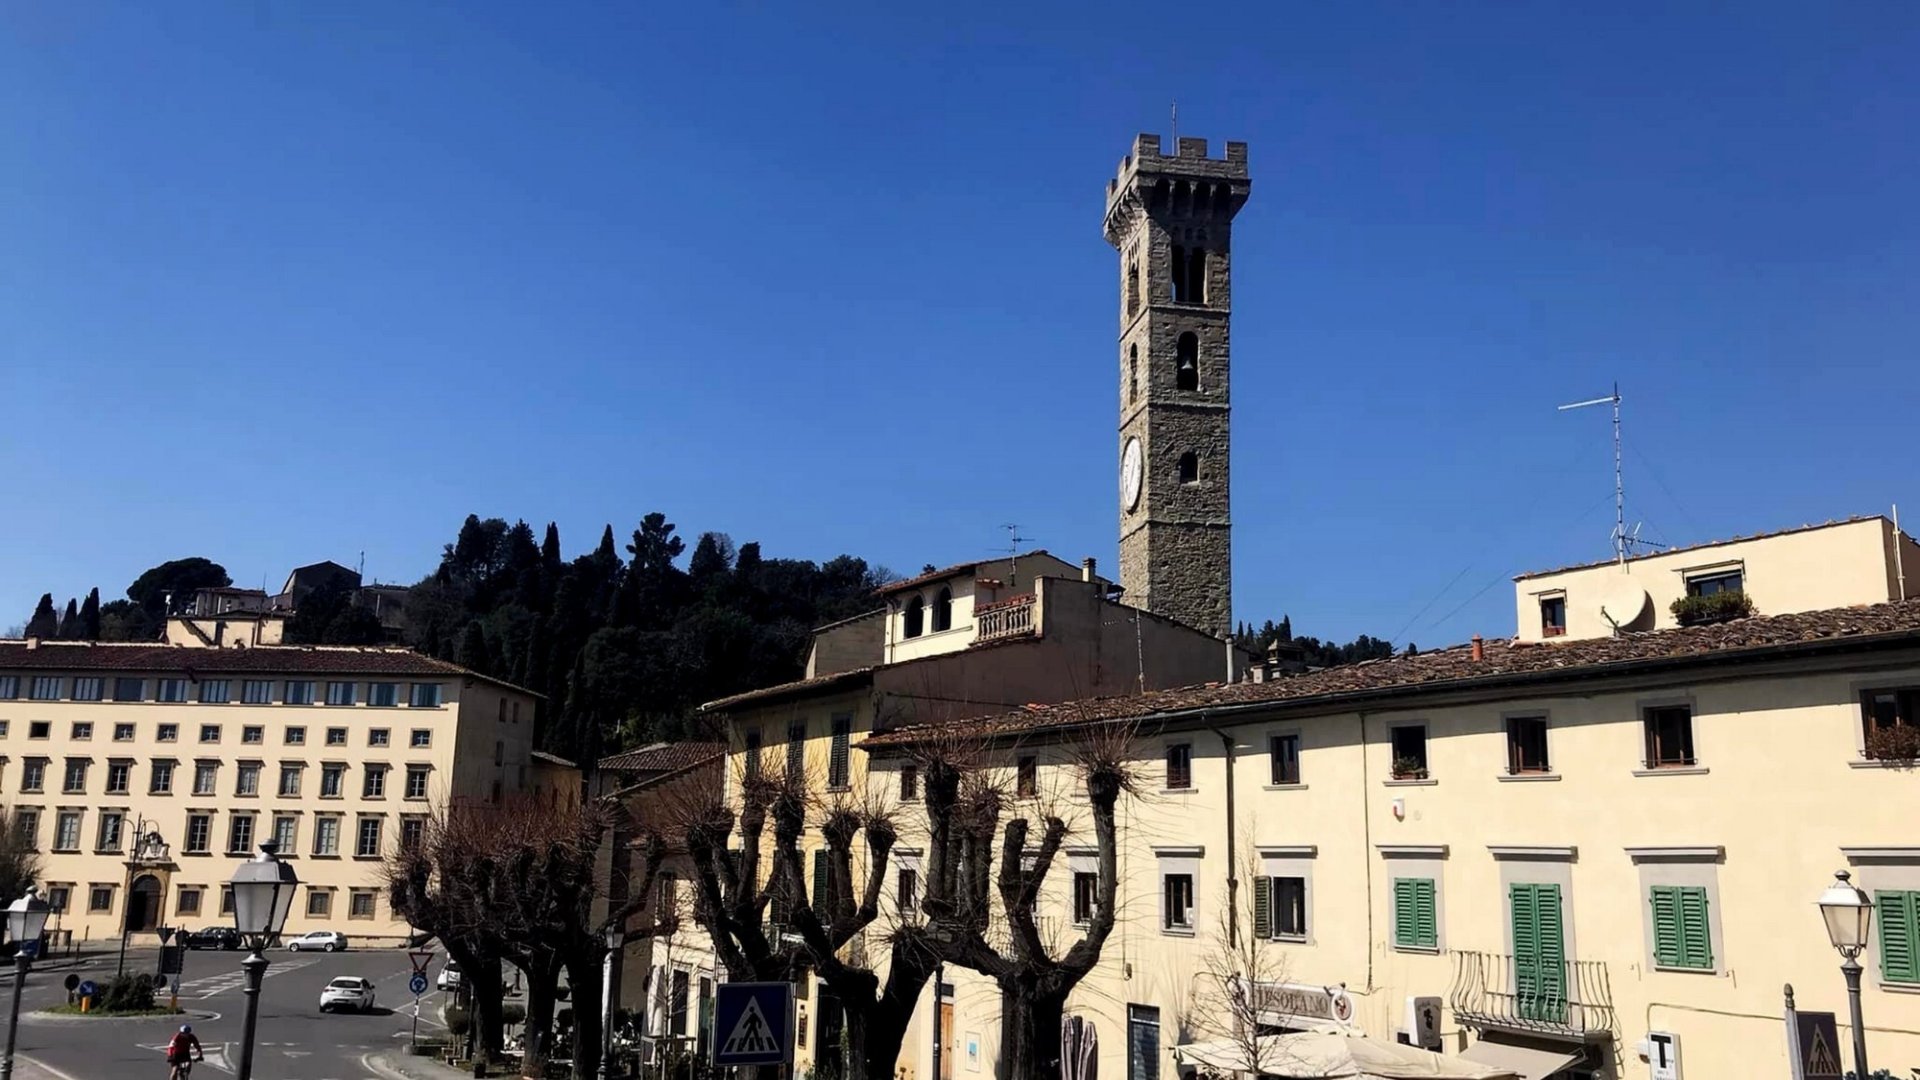 Firenze: Tour to Fiesole, Monte Ceceri and the quarries of Maiano